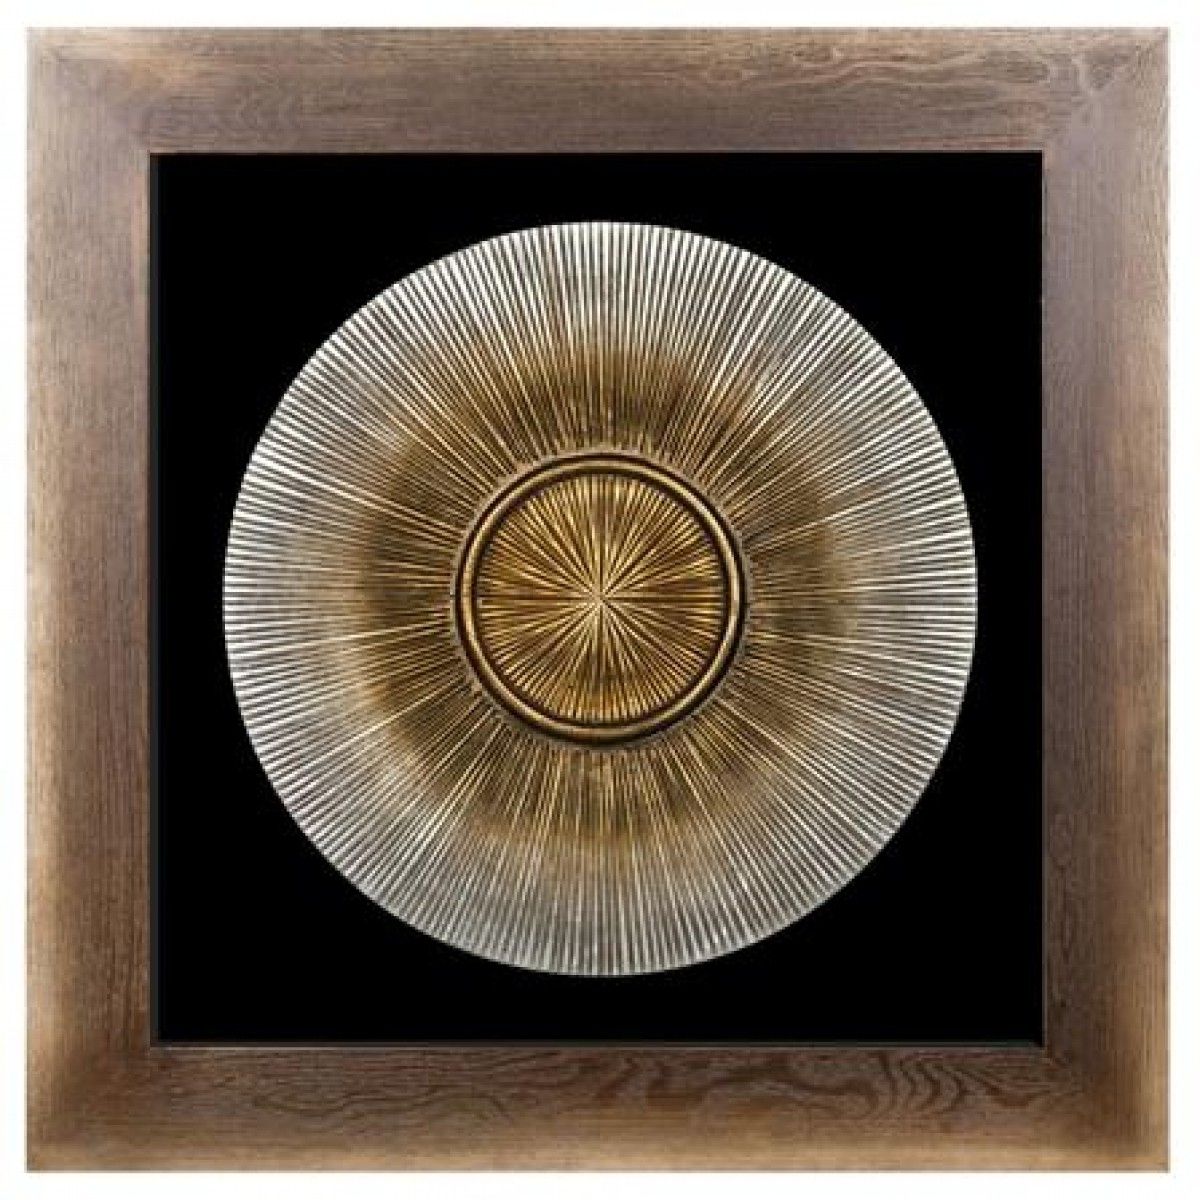 Wall Art Designs: Bronze Wall Art Sunburst Mirrored Silver Golden Intended For Current Abstract Circles Wall Art (View 2 of 15)